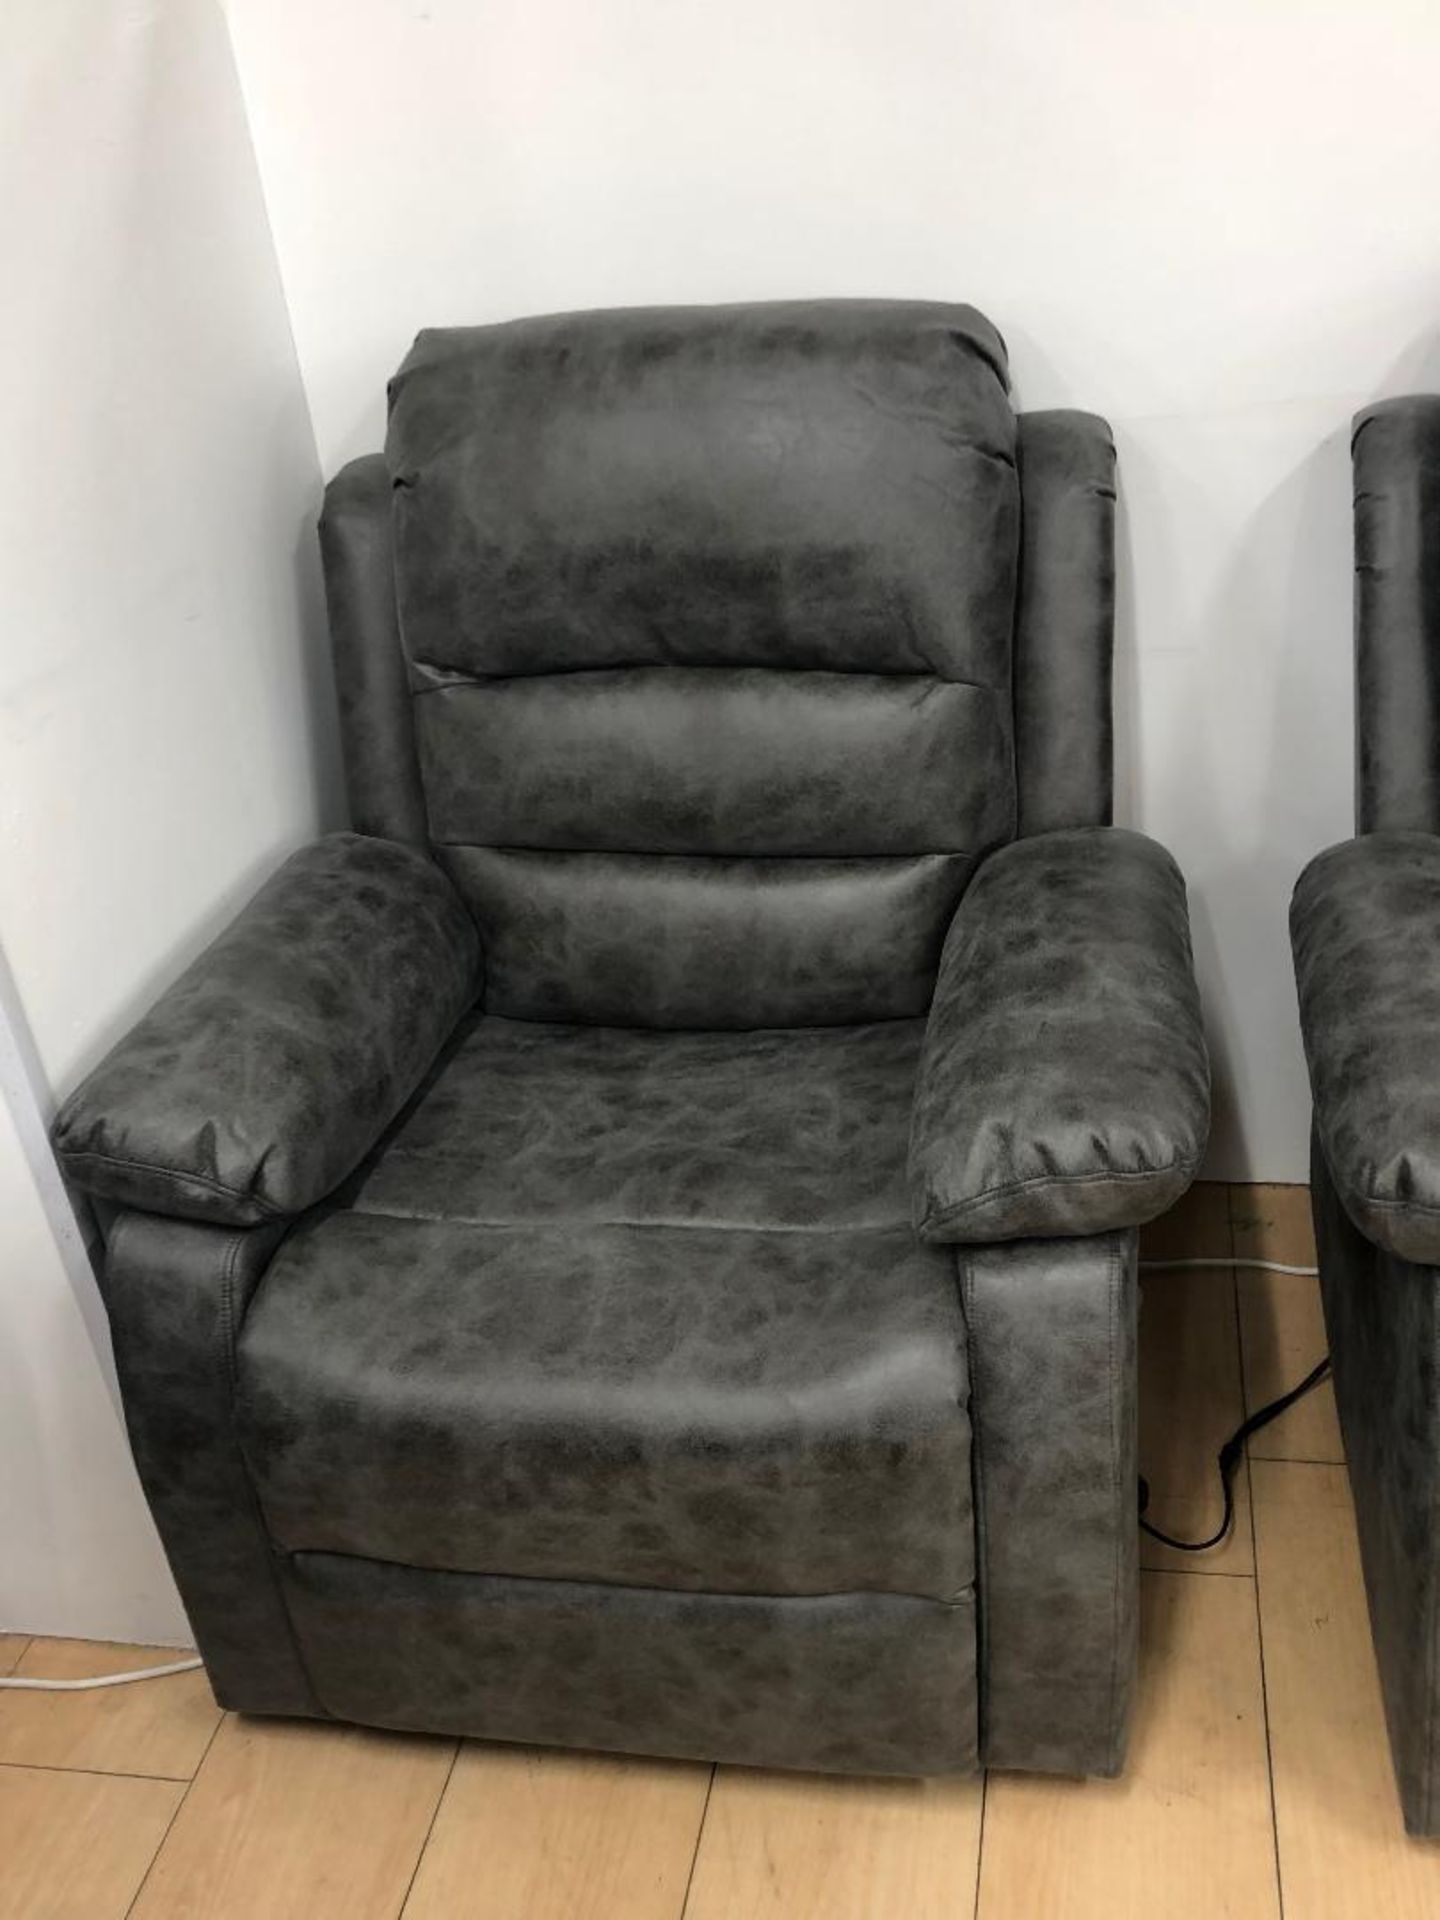 Brand new boxed Cartier 3 seater plus 2 seater plus arm chair in grey plush velvet suede fabric - Image 4 of 5